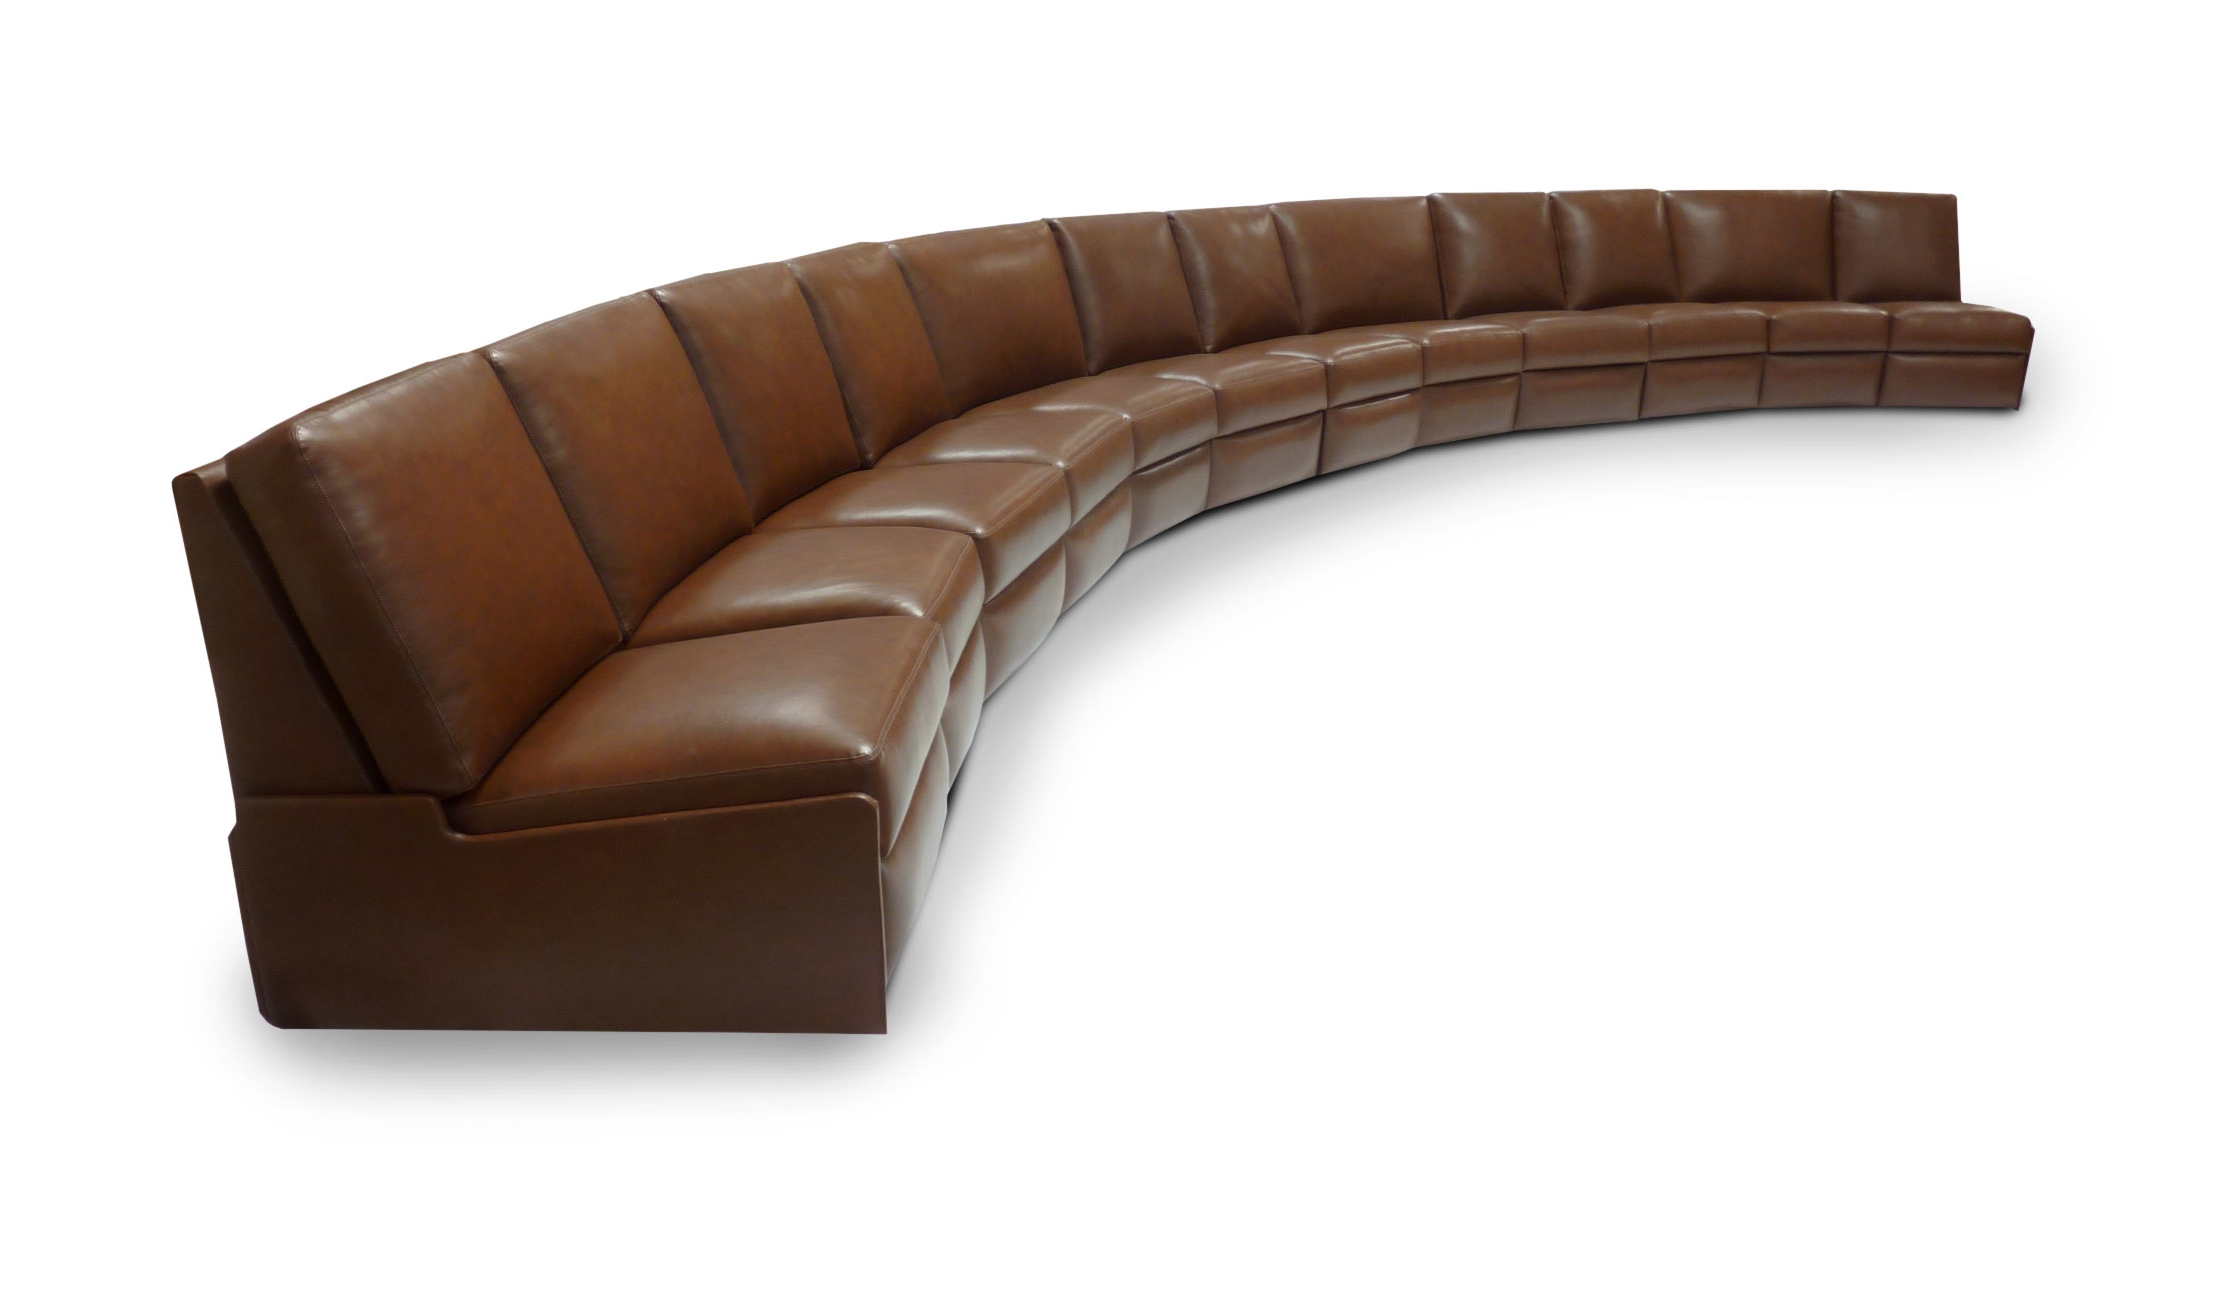   12-seat curved sofa - no arms  